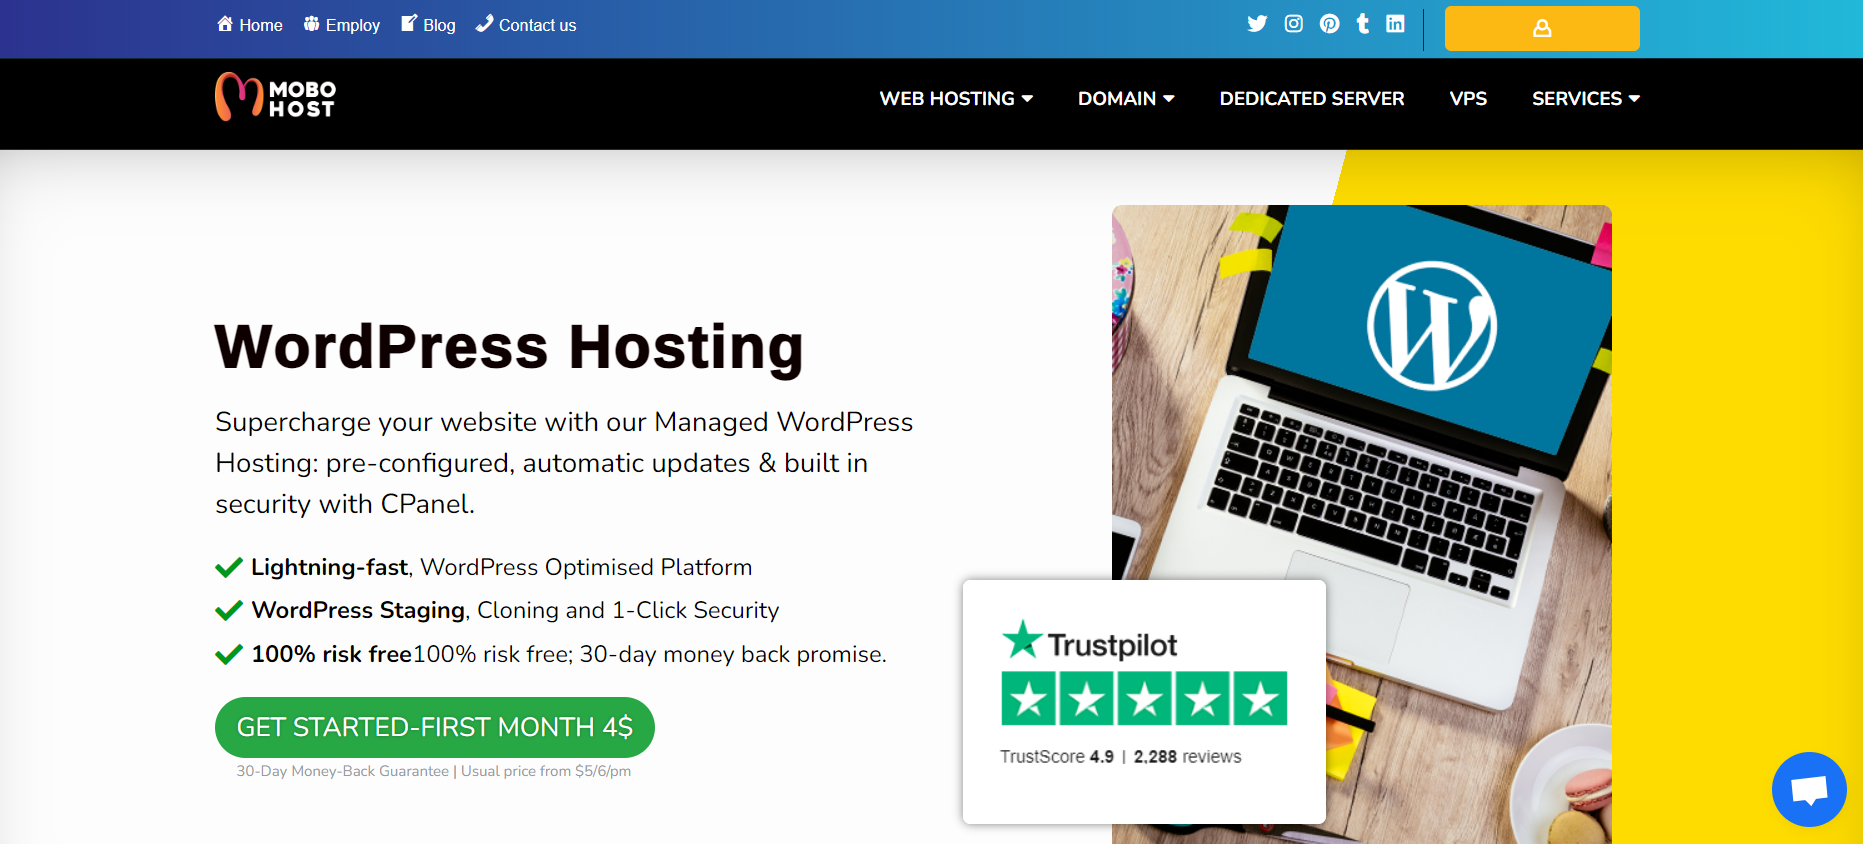 Why is the price of Mobohost.com German WordPress hosting products lower than other companies?